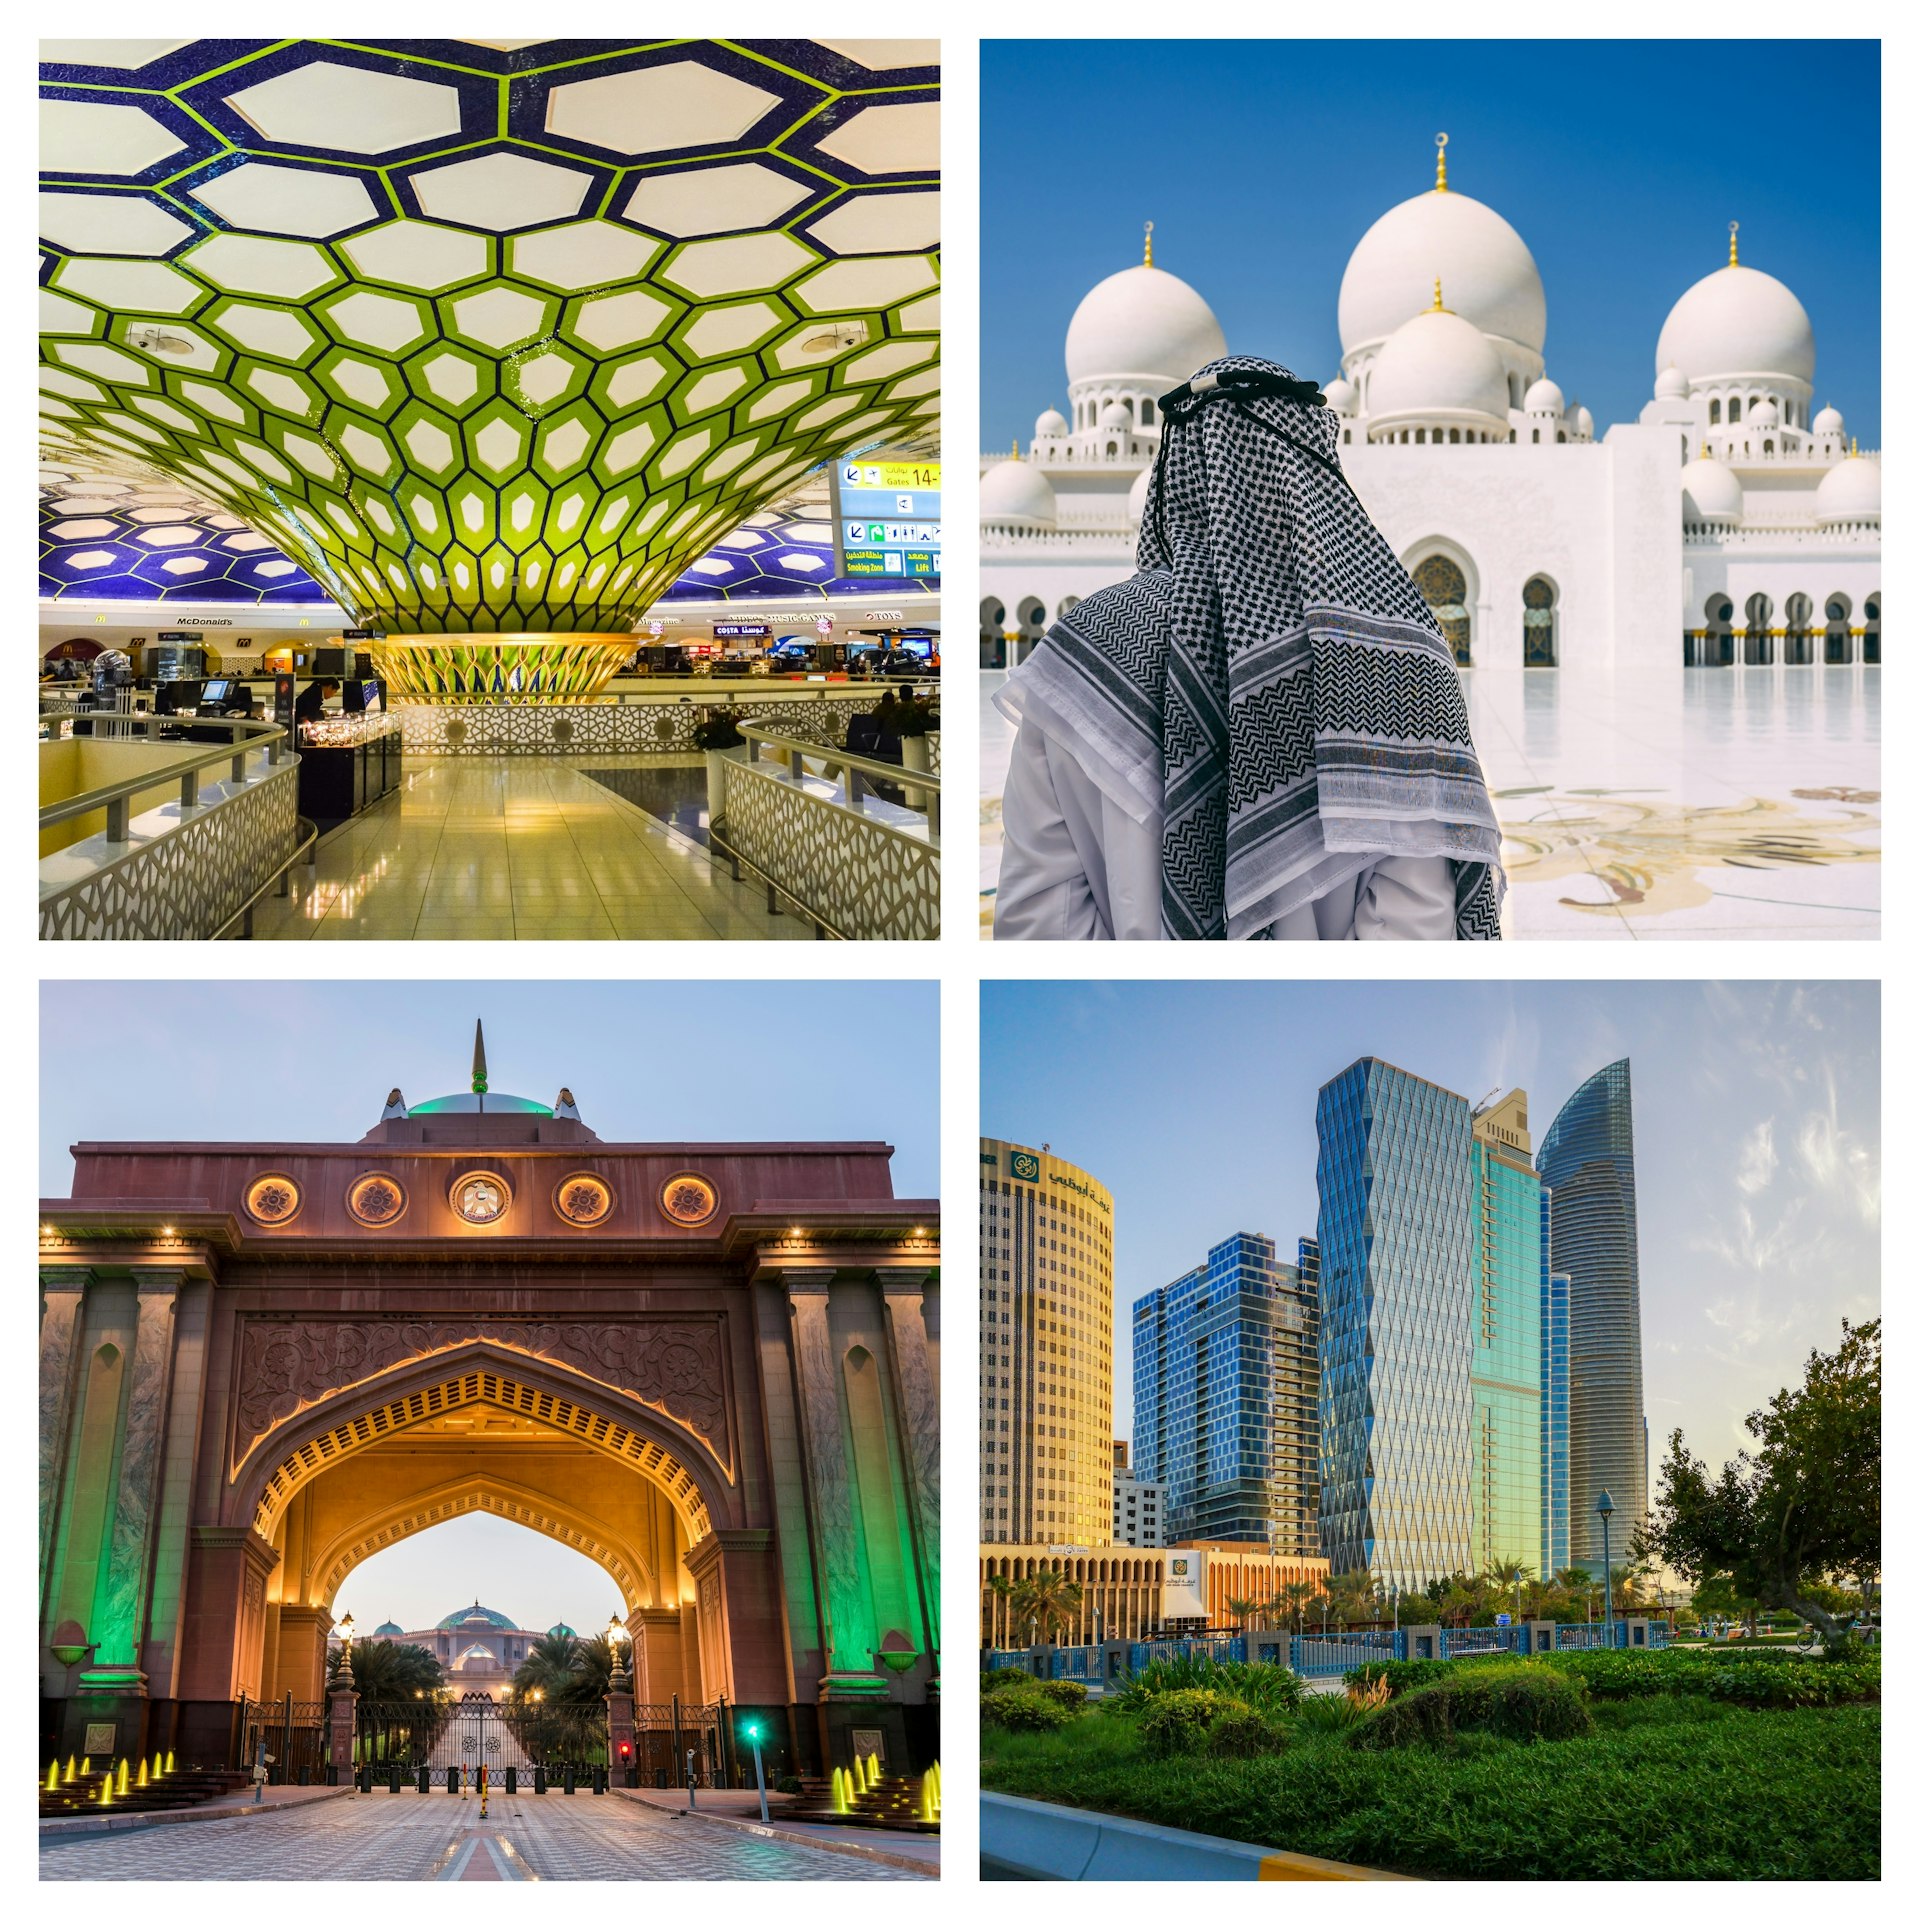 TOP LEFT: Inside the terminal at Abu Dhabi International Airport © Shutterstock; TOP RIGHT: Sheikh Zayed Grand Mosque, Abu Dhabi © Sabino Parente / Getty Images; BOTTOM LEFT: Emirates Palace and Ministry of Presidential Affairs in Abu Dhabi © Getty; BOTTOM RIGHT: City towers in Abu Dhabi © Mohamad Kaddoura / Getty Images